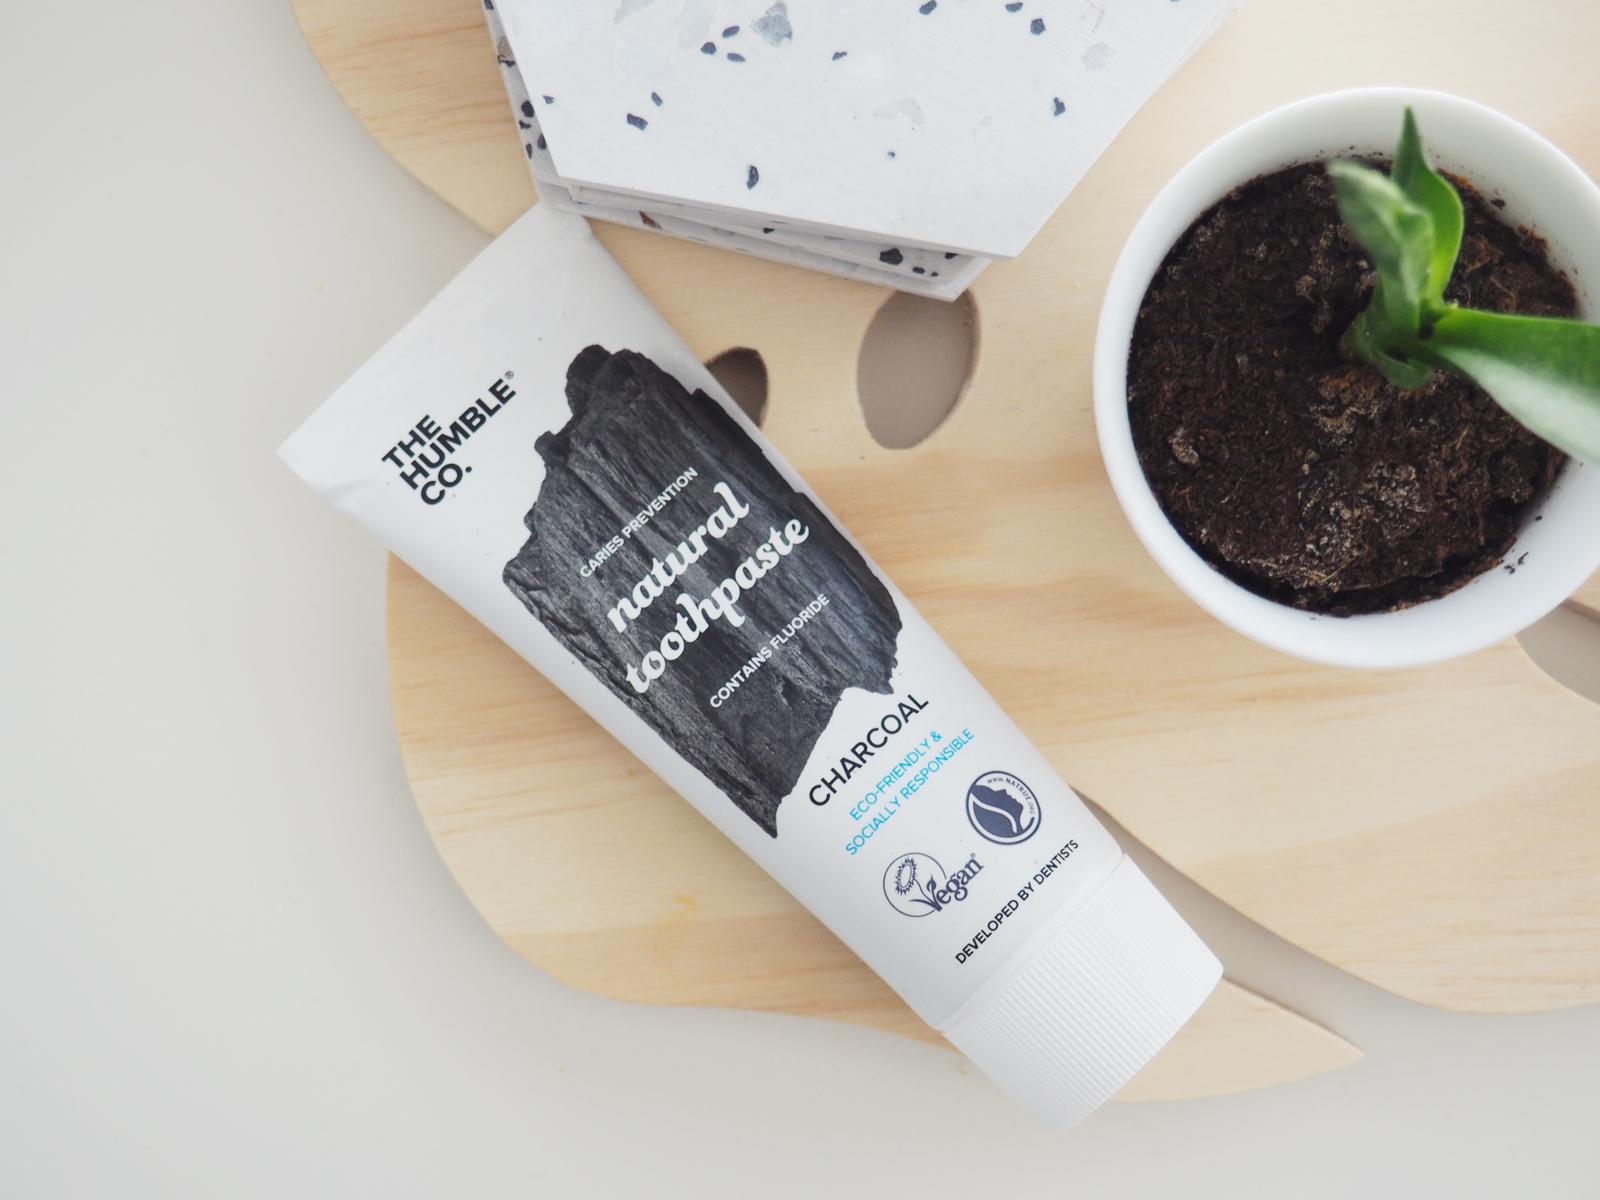 Natural Toothpaste Charcoal | Natural Toothpaste Cinnamon | Natural Toothpaste Fresh Mint | Natural Toothpaste | Cinnamon with fluoride | The Humble Co. | Nourished Eco Oral Care | Natural Toothpaste | The Humble Co. | Nourished